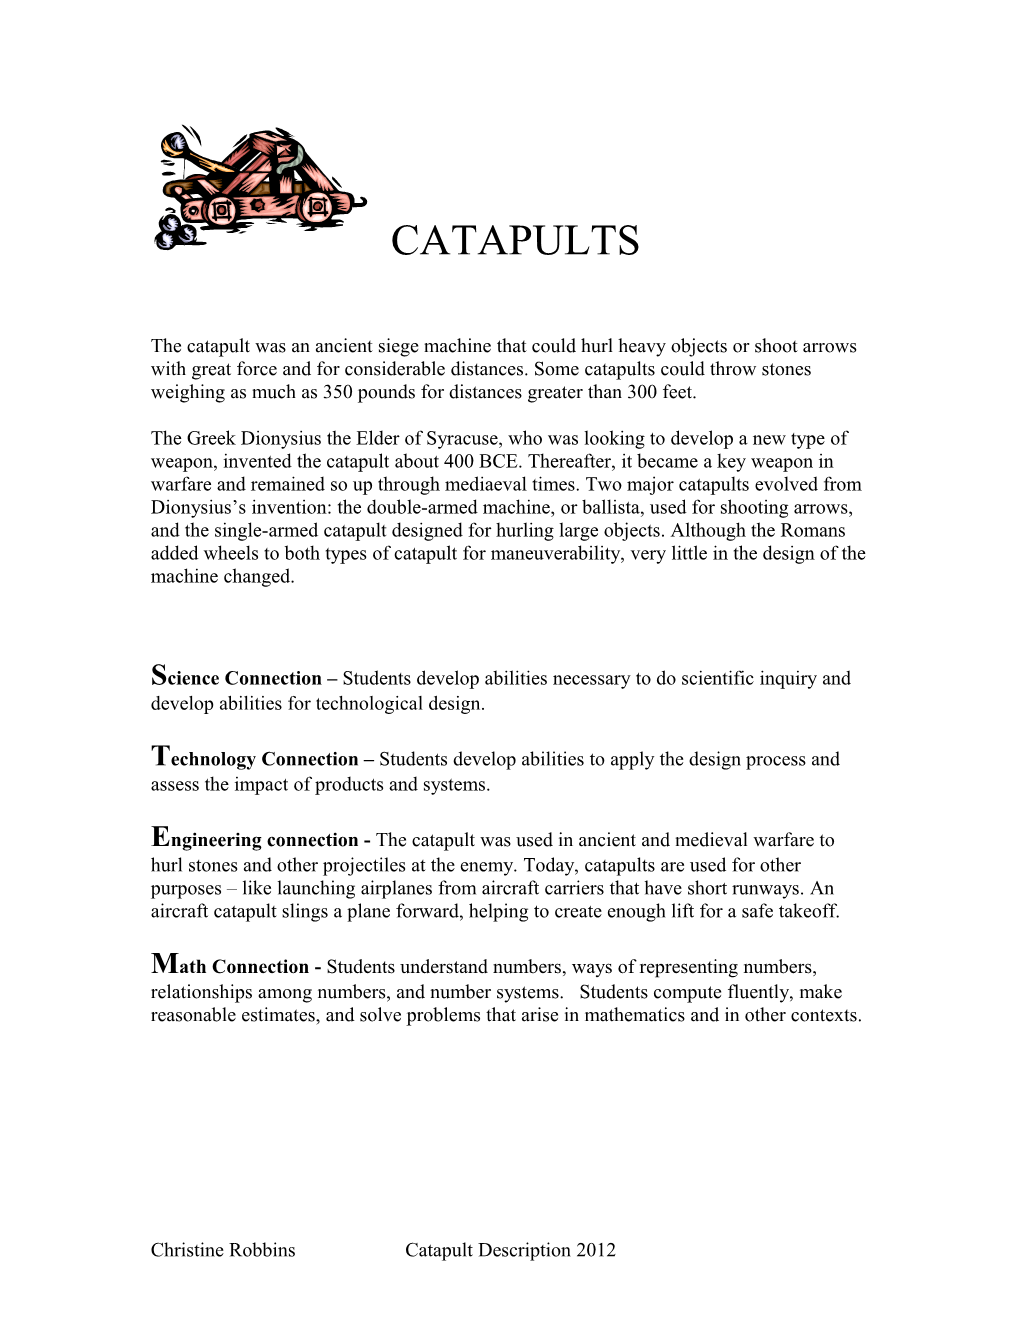 The Catapult Was an Ancient Siege Machine That Could Hurl Heavy Objects Or Shoot Arrows